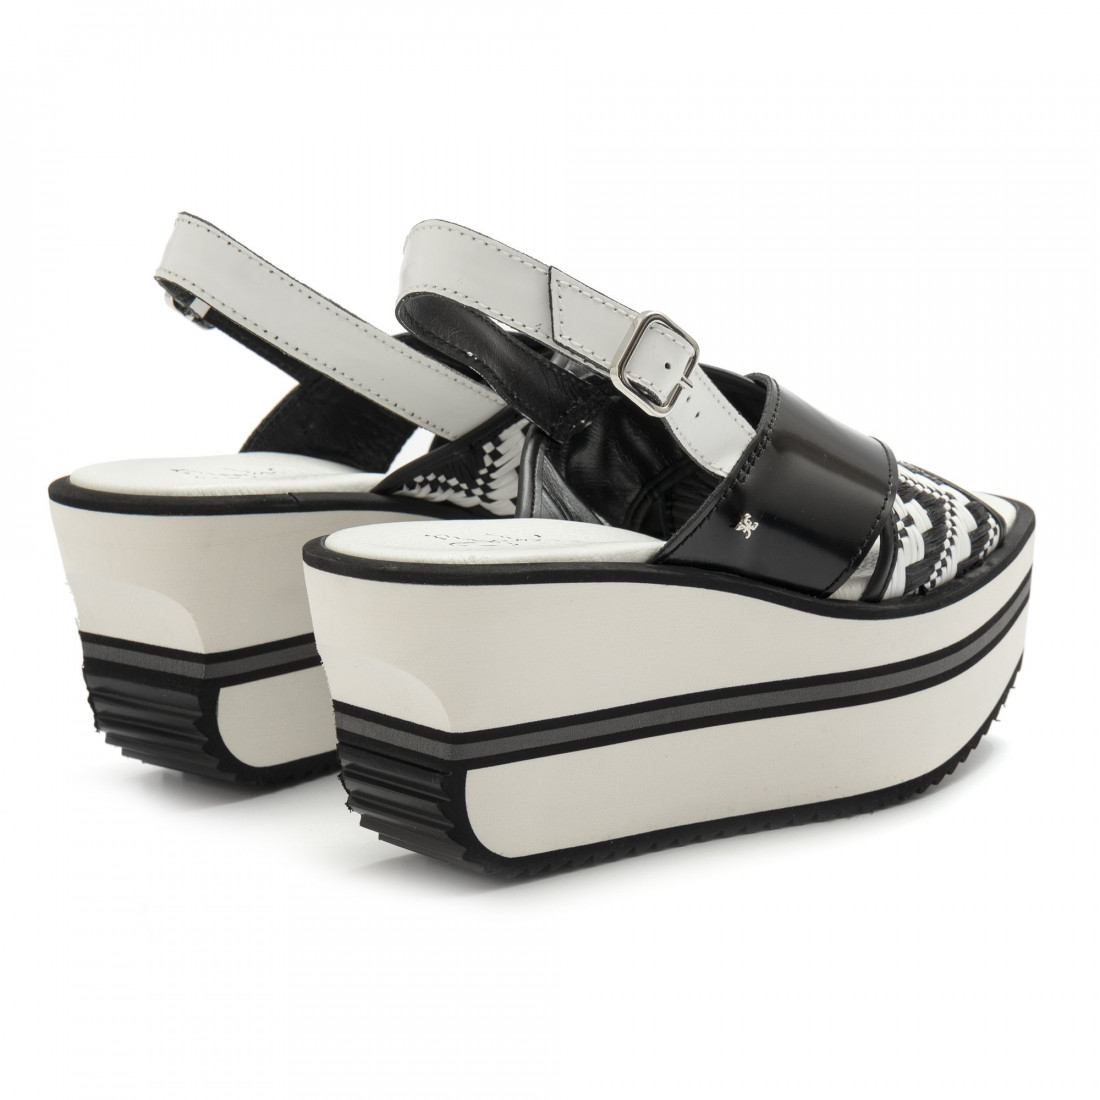 Black and white leather Fabi wedge sandals